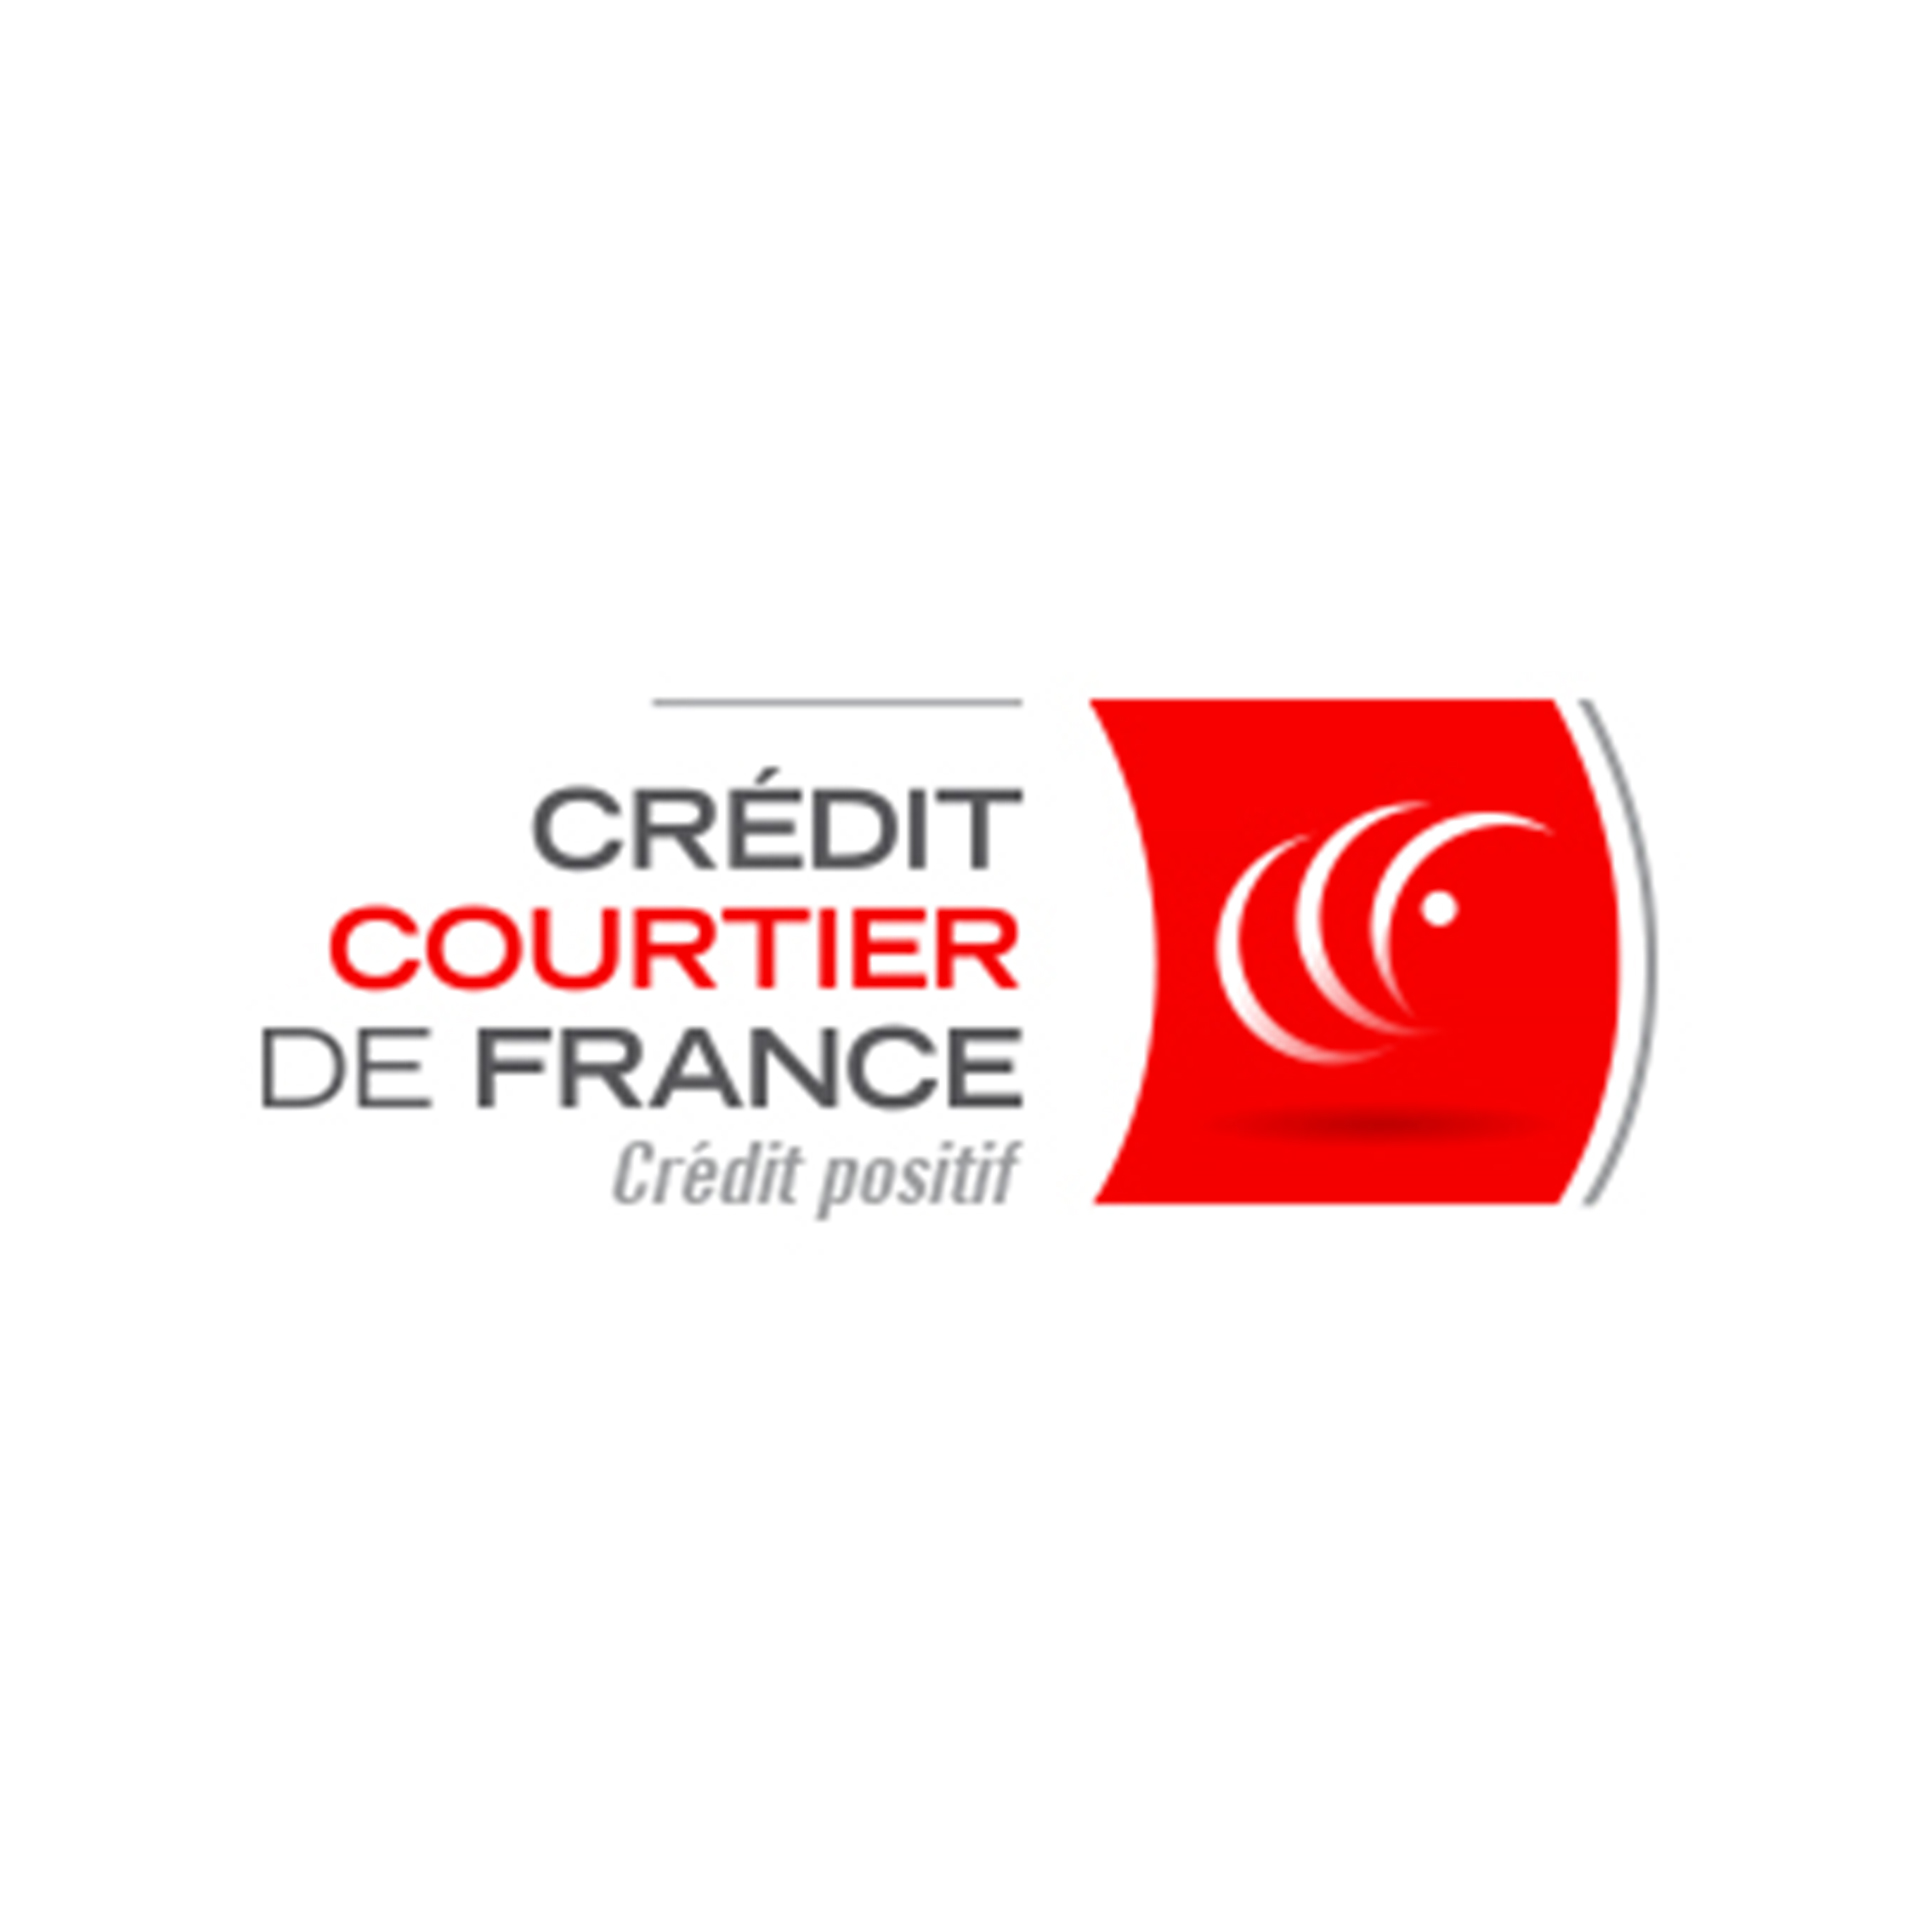 See the How Crédit Courtier de France is investing in its future in Lyon success story